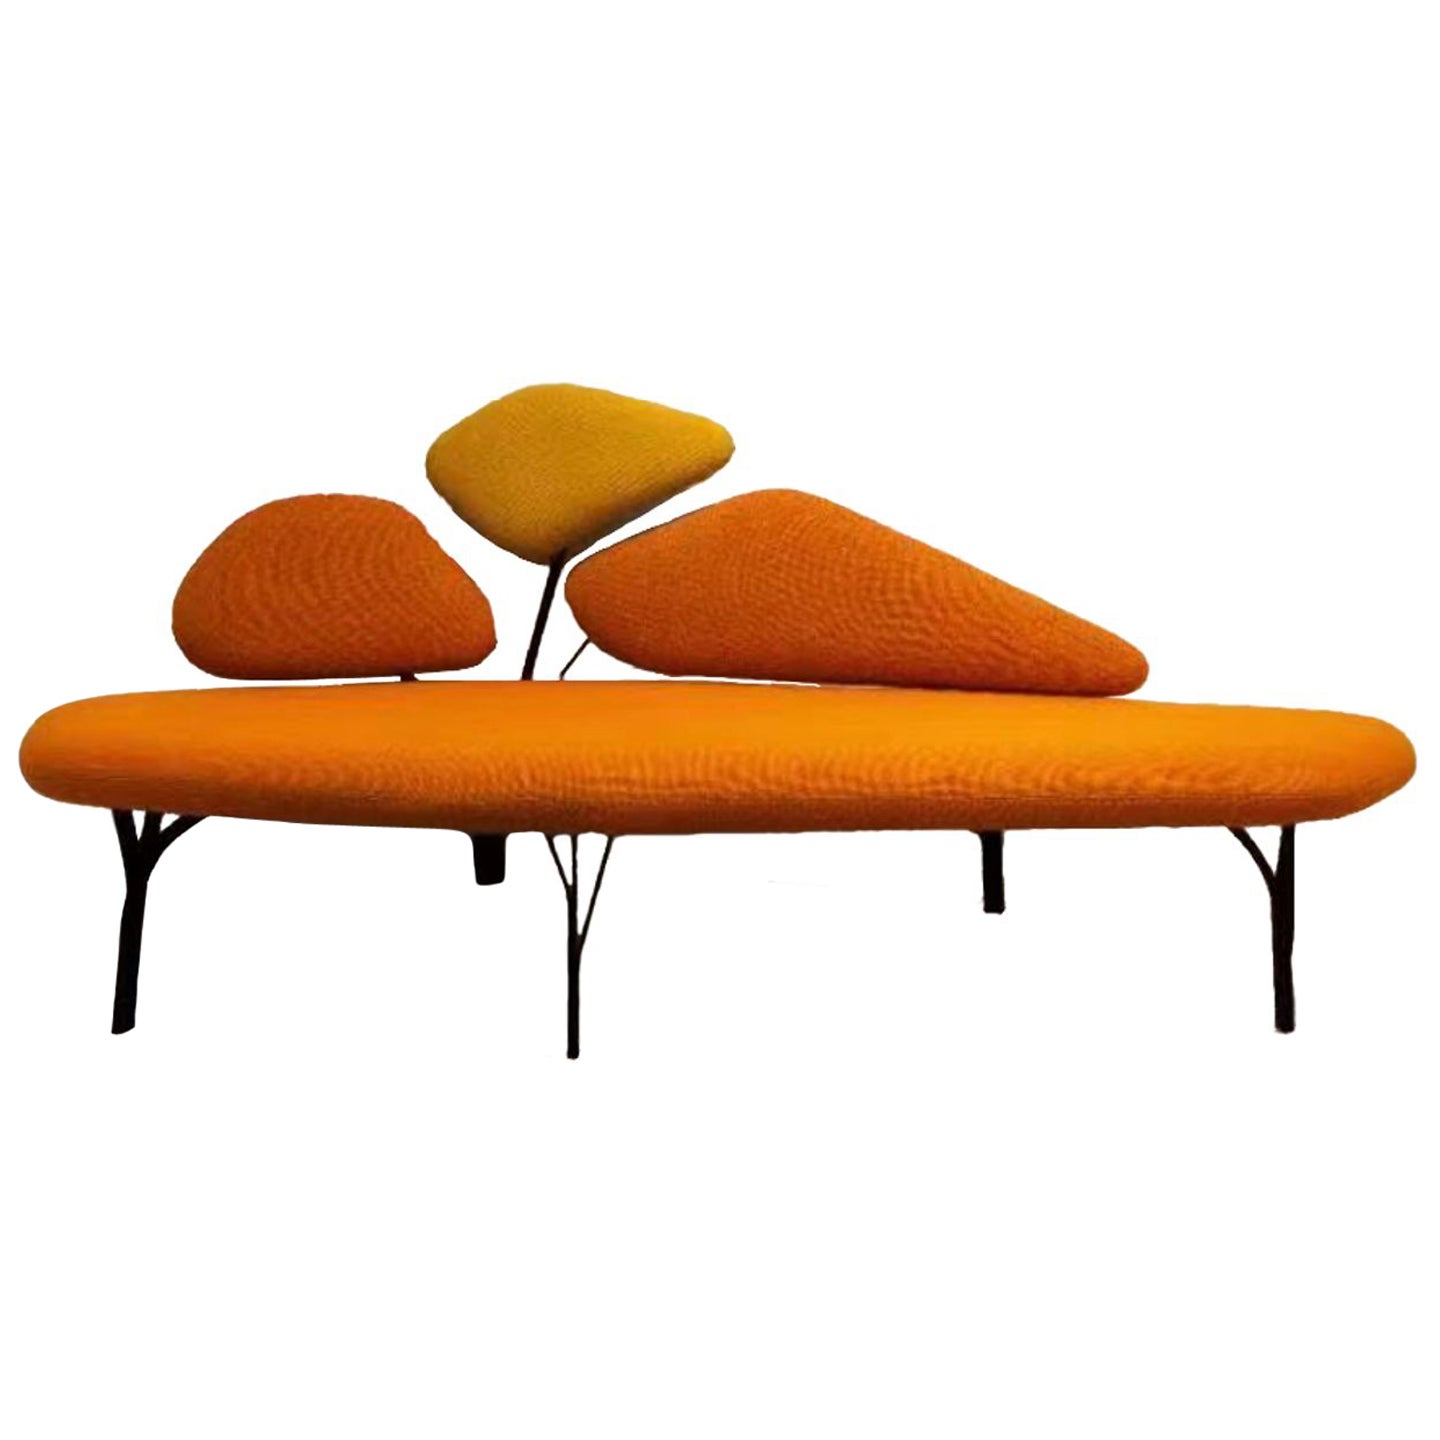 Borghese Orange Sofa Black Textured Structure By La Chance For Sale